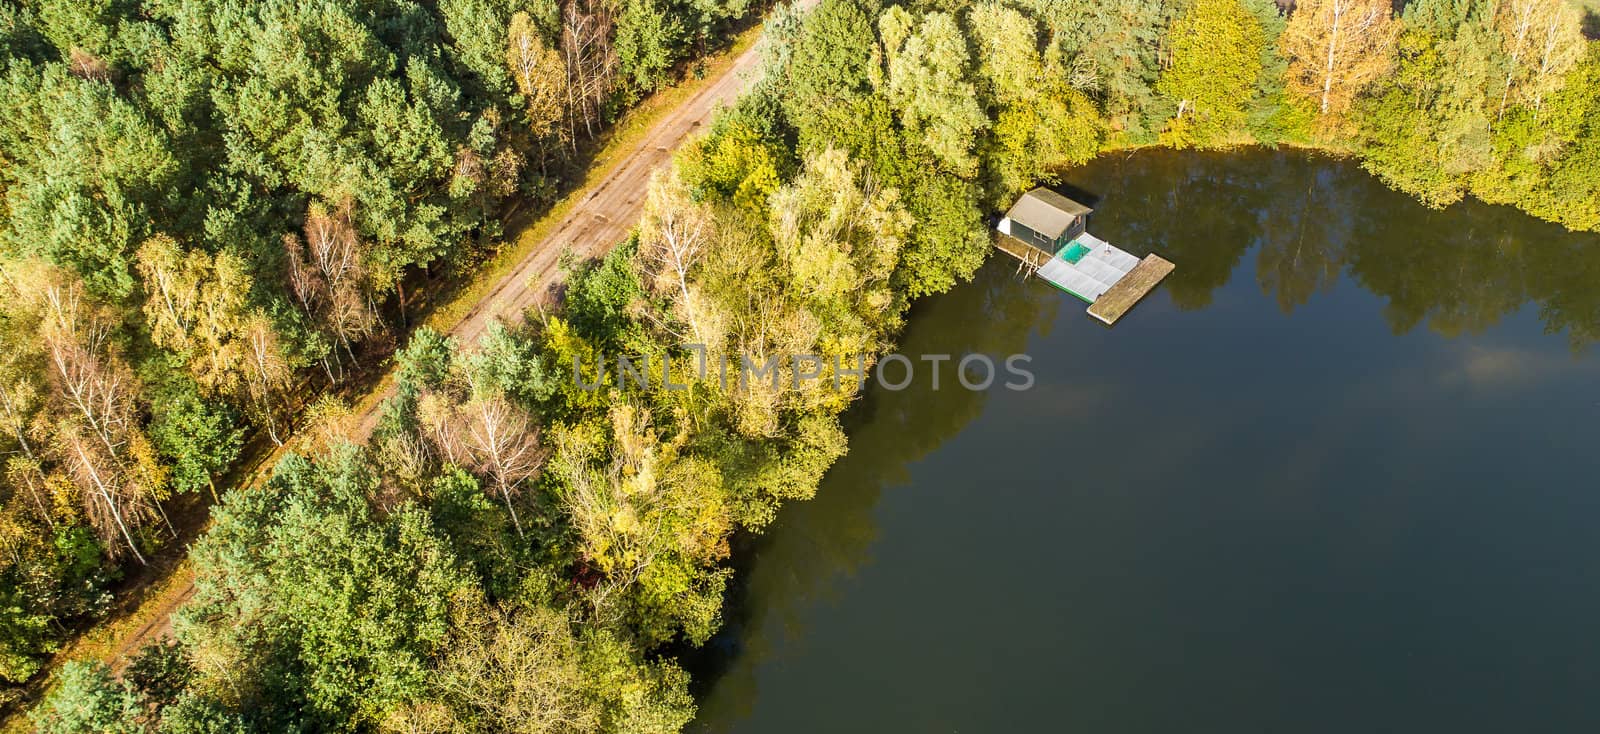 Fishing lodge in the corner of a pond, path with trees, aerial view with drone